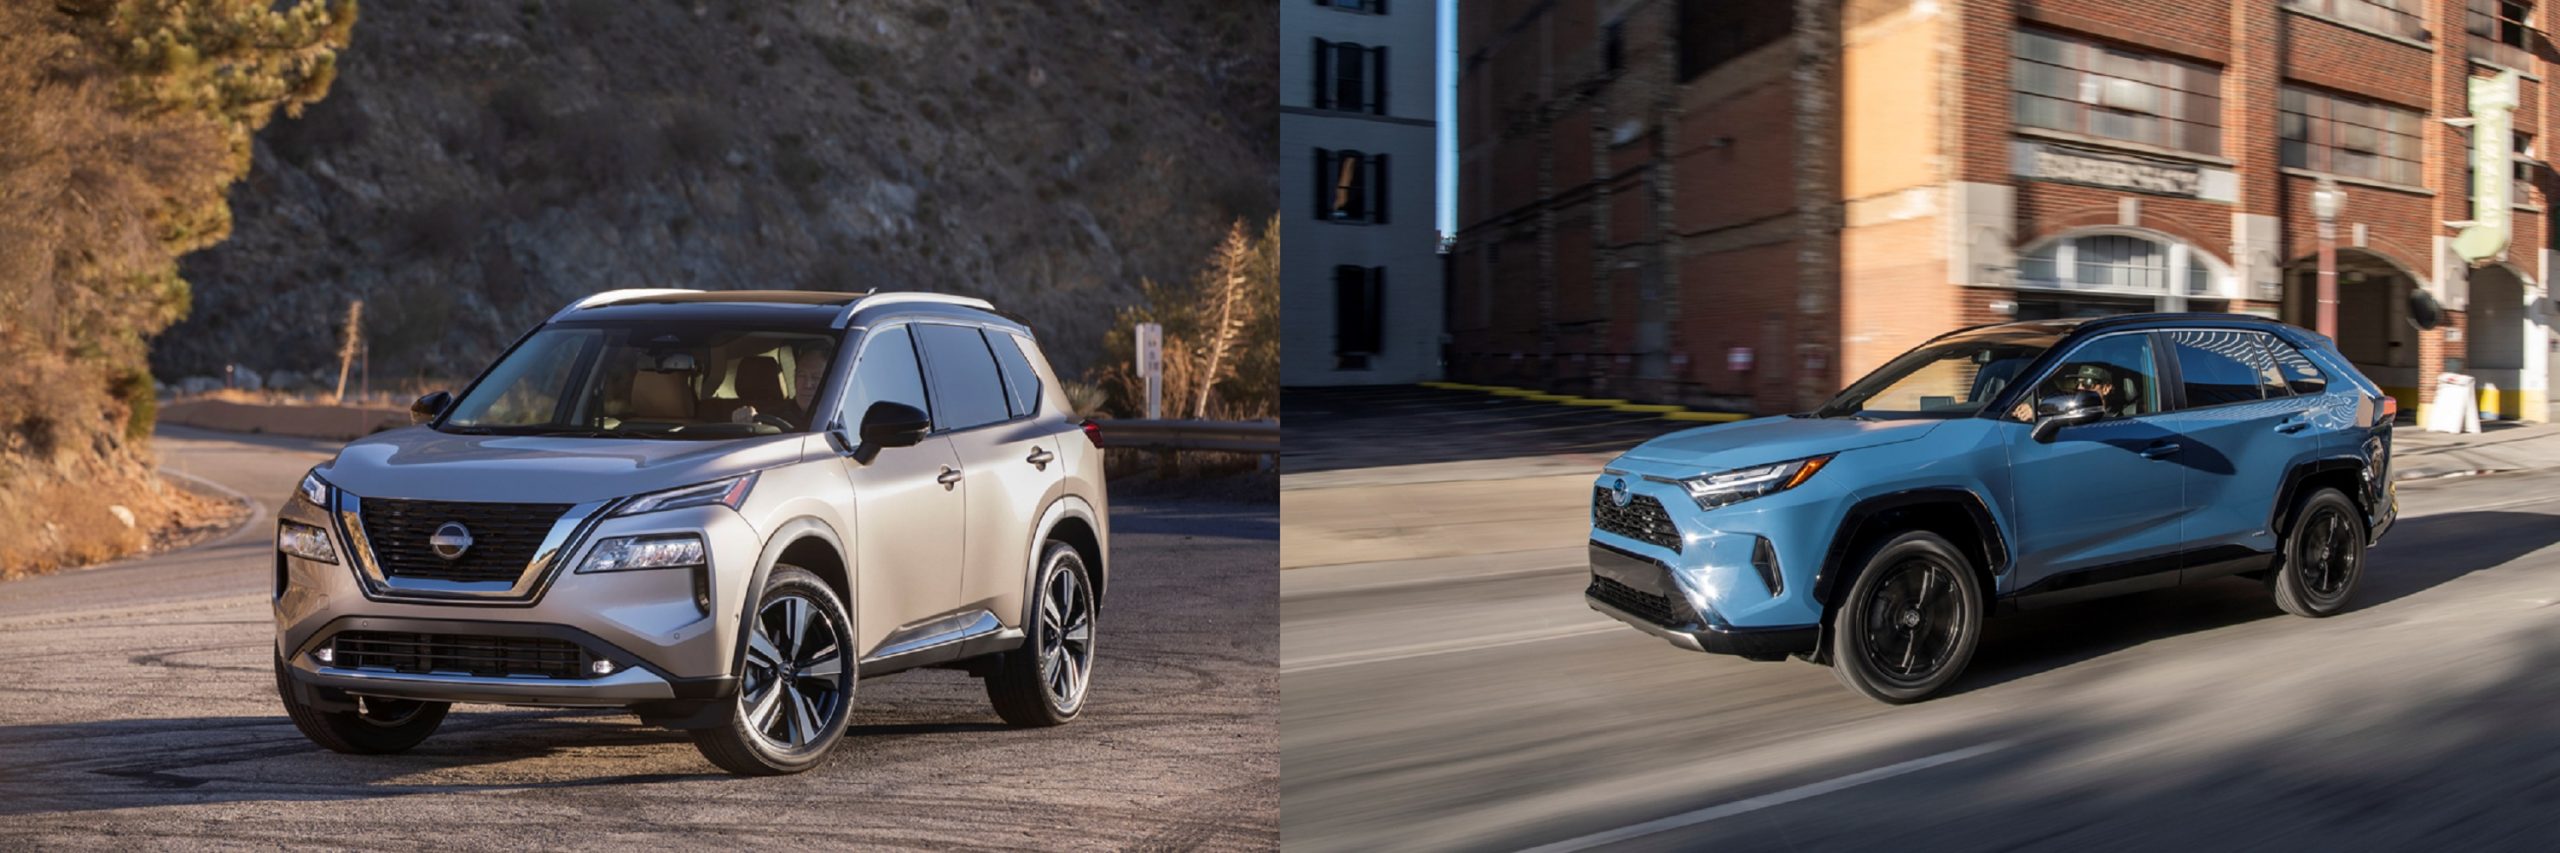 See and Compare Nissan rogue vs. Toyota RAV4